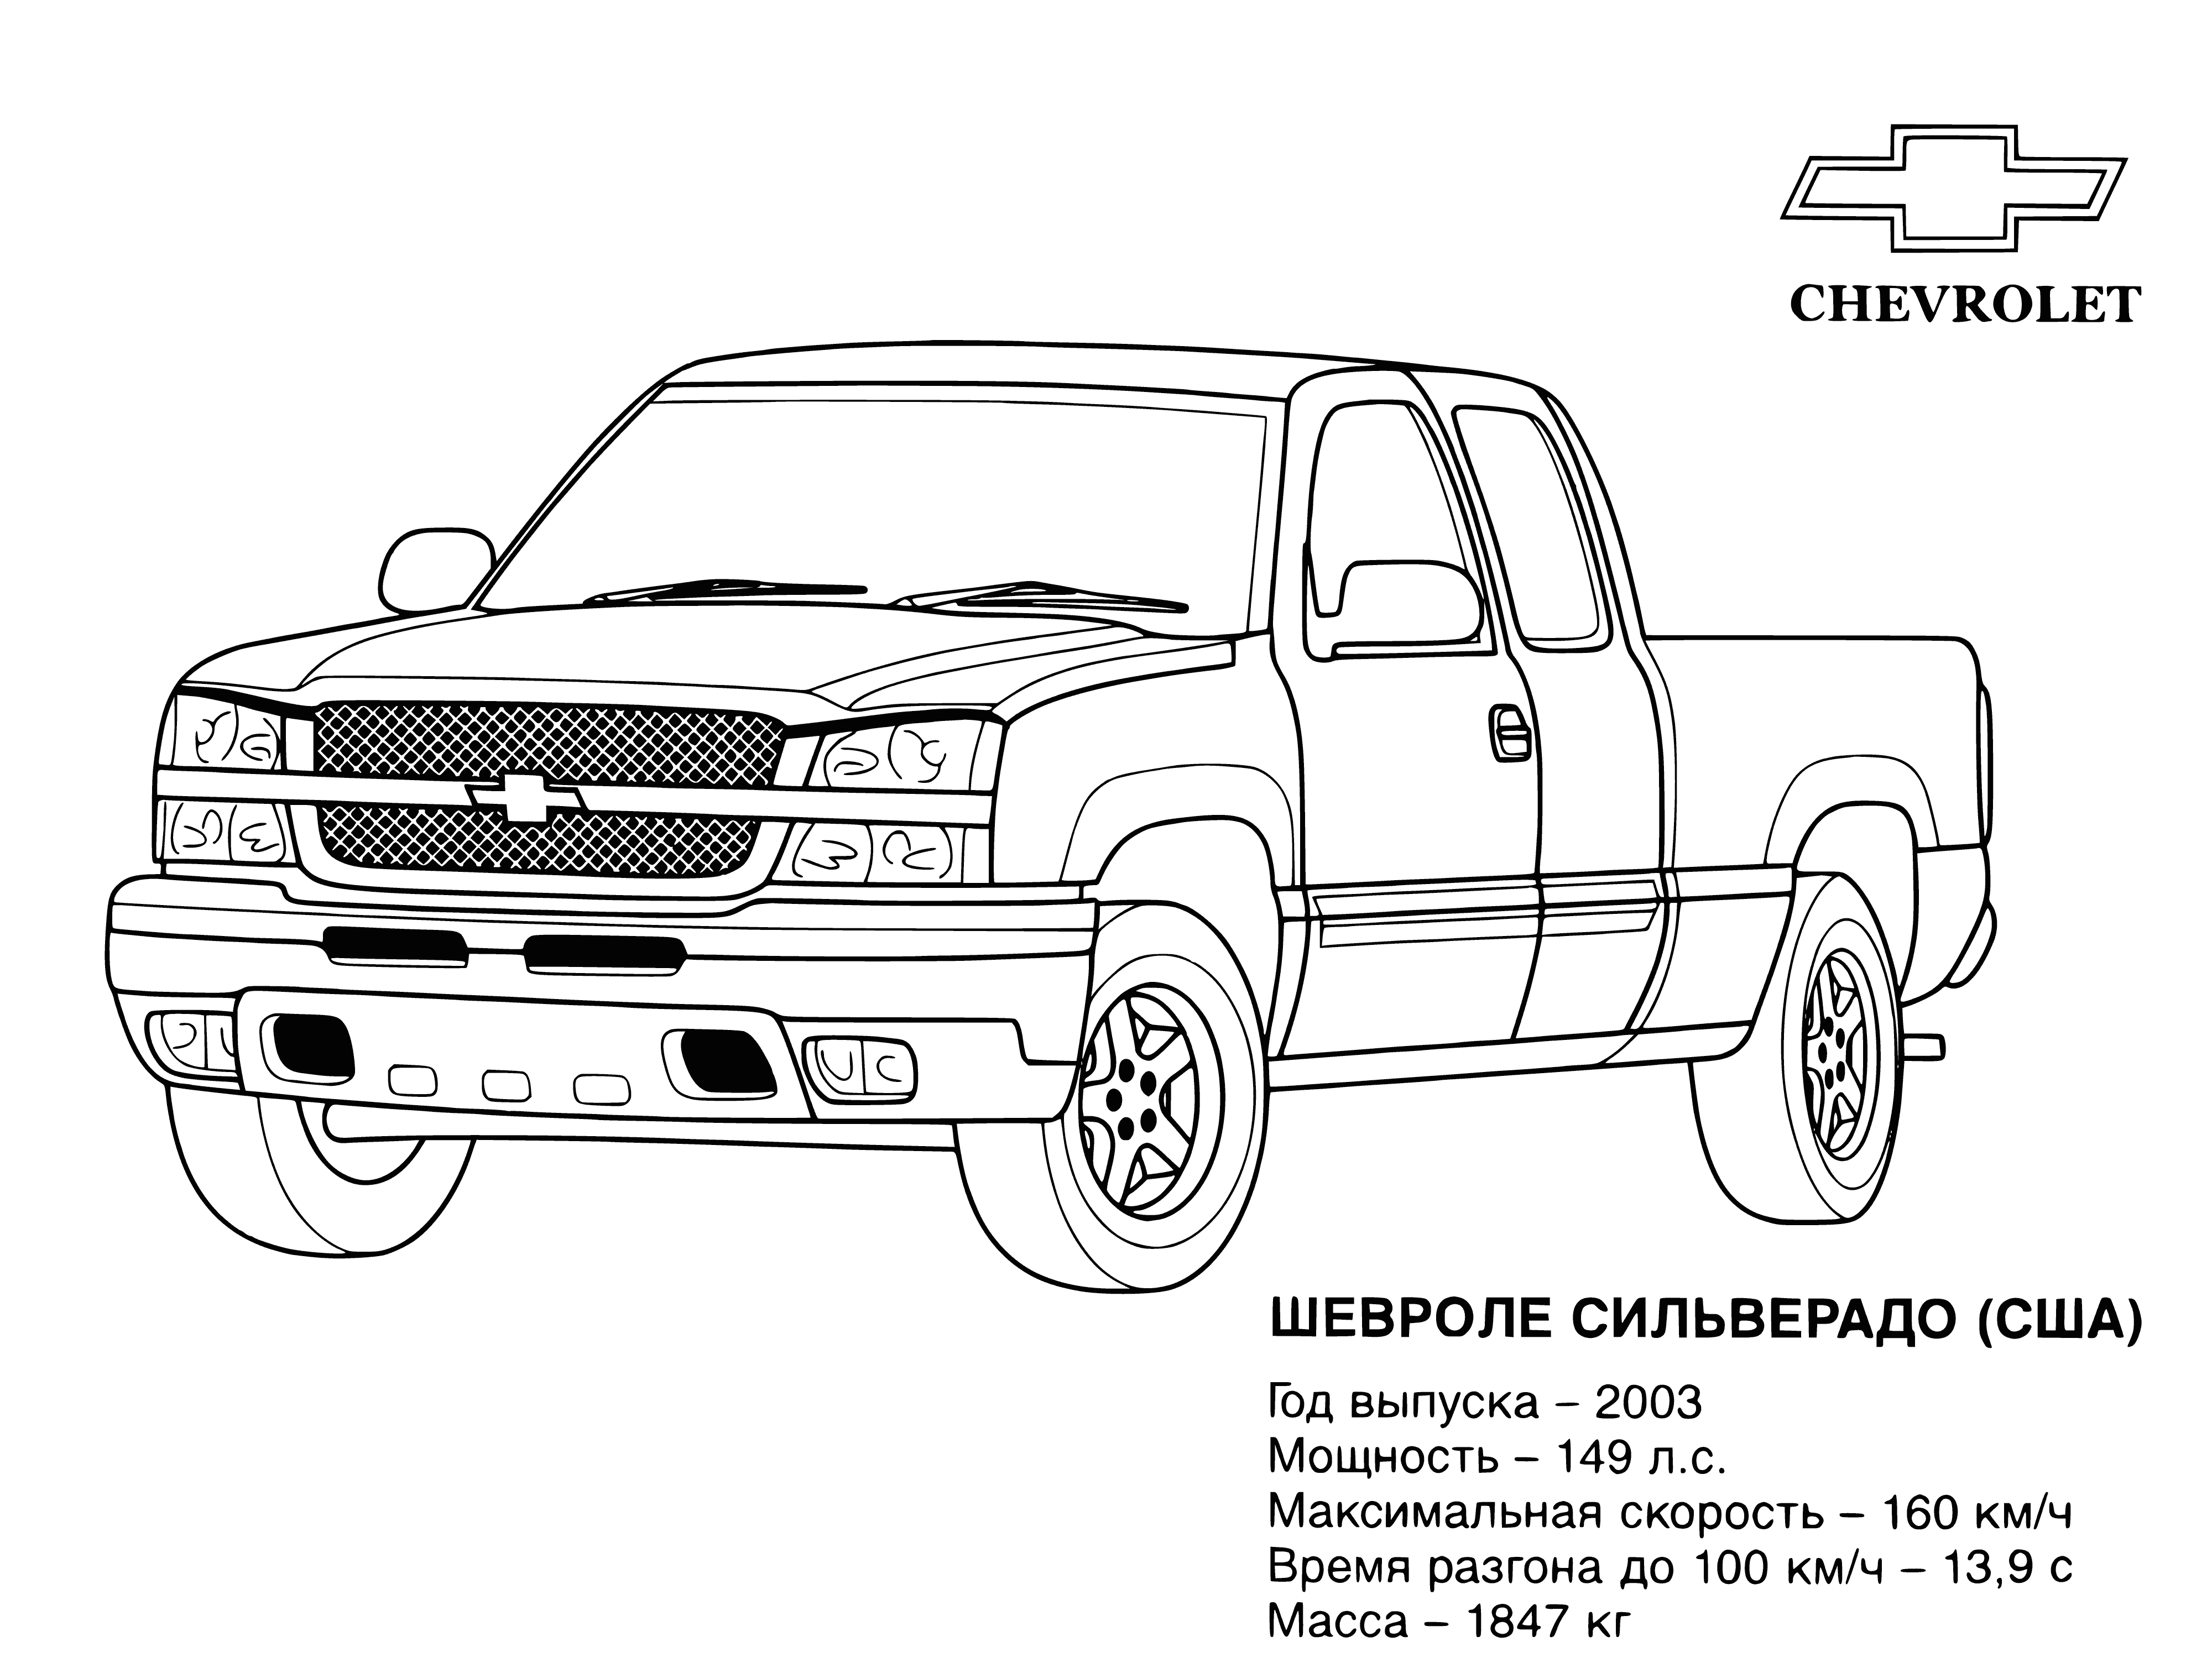 Chevrolet (USA) coloring page